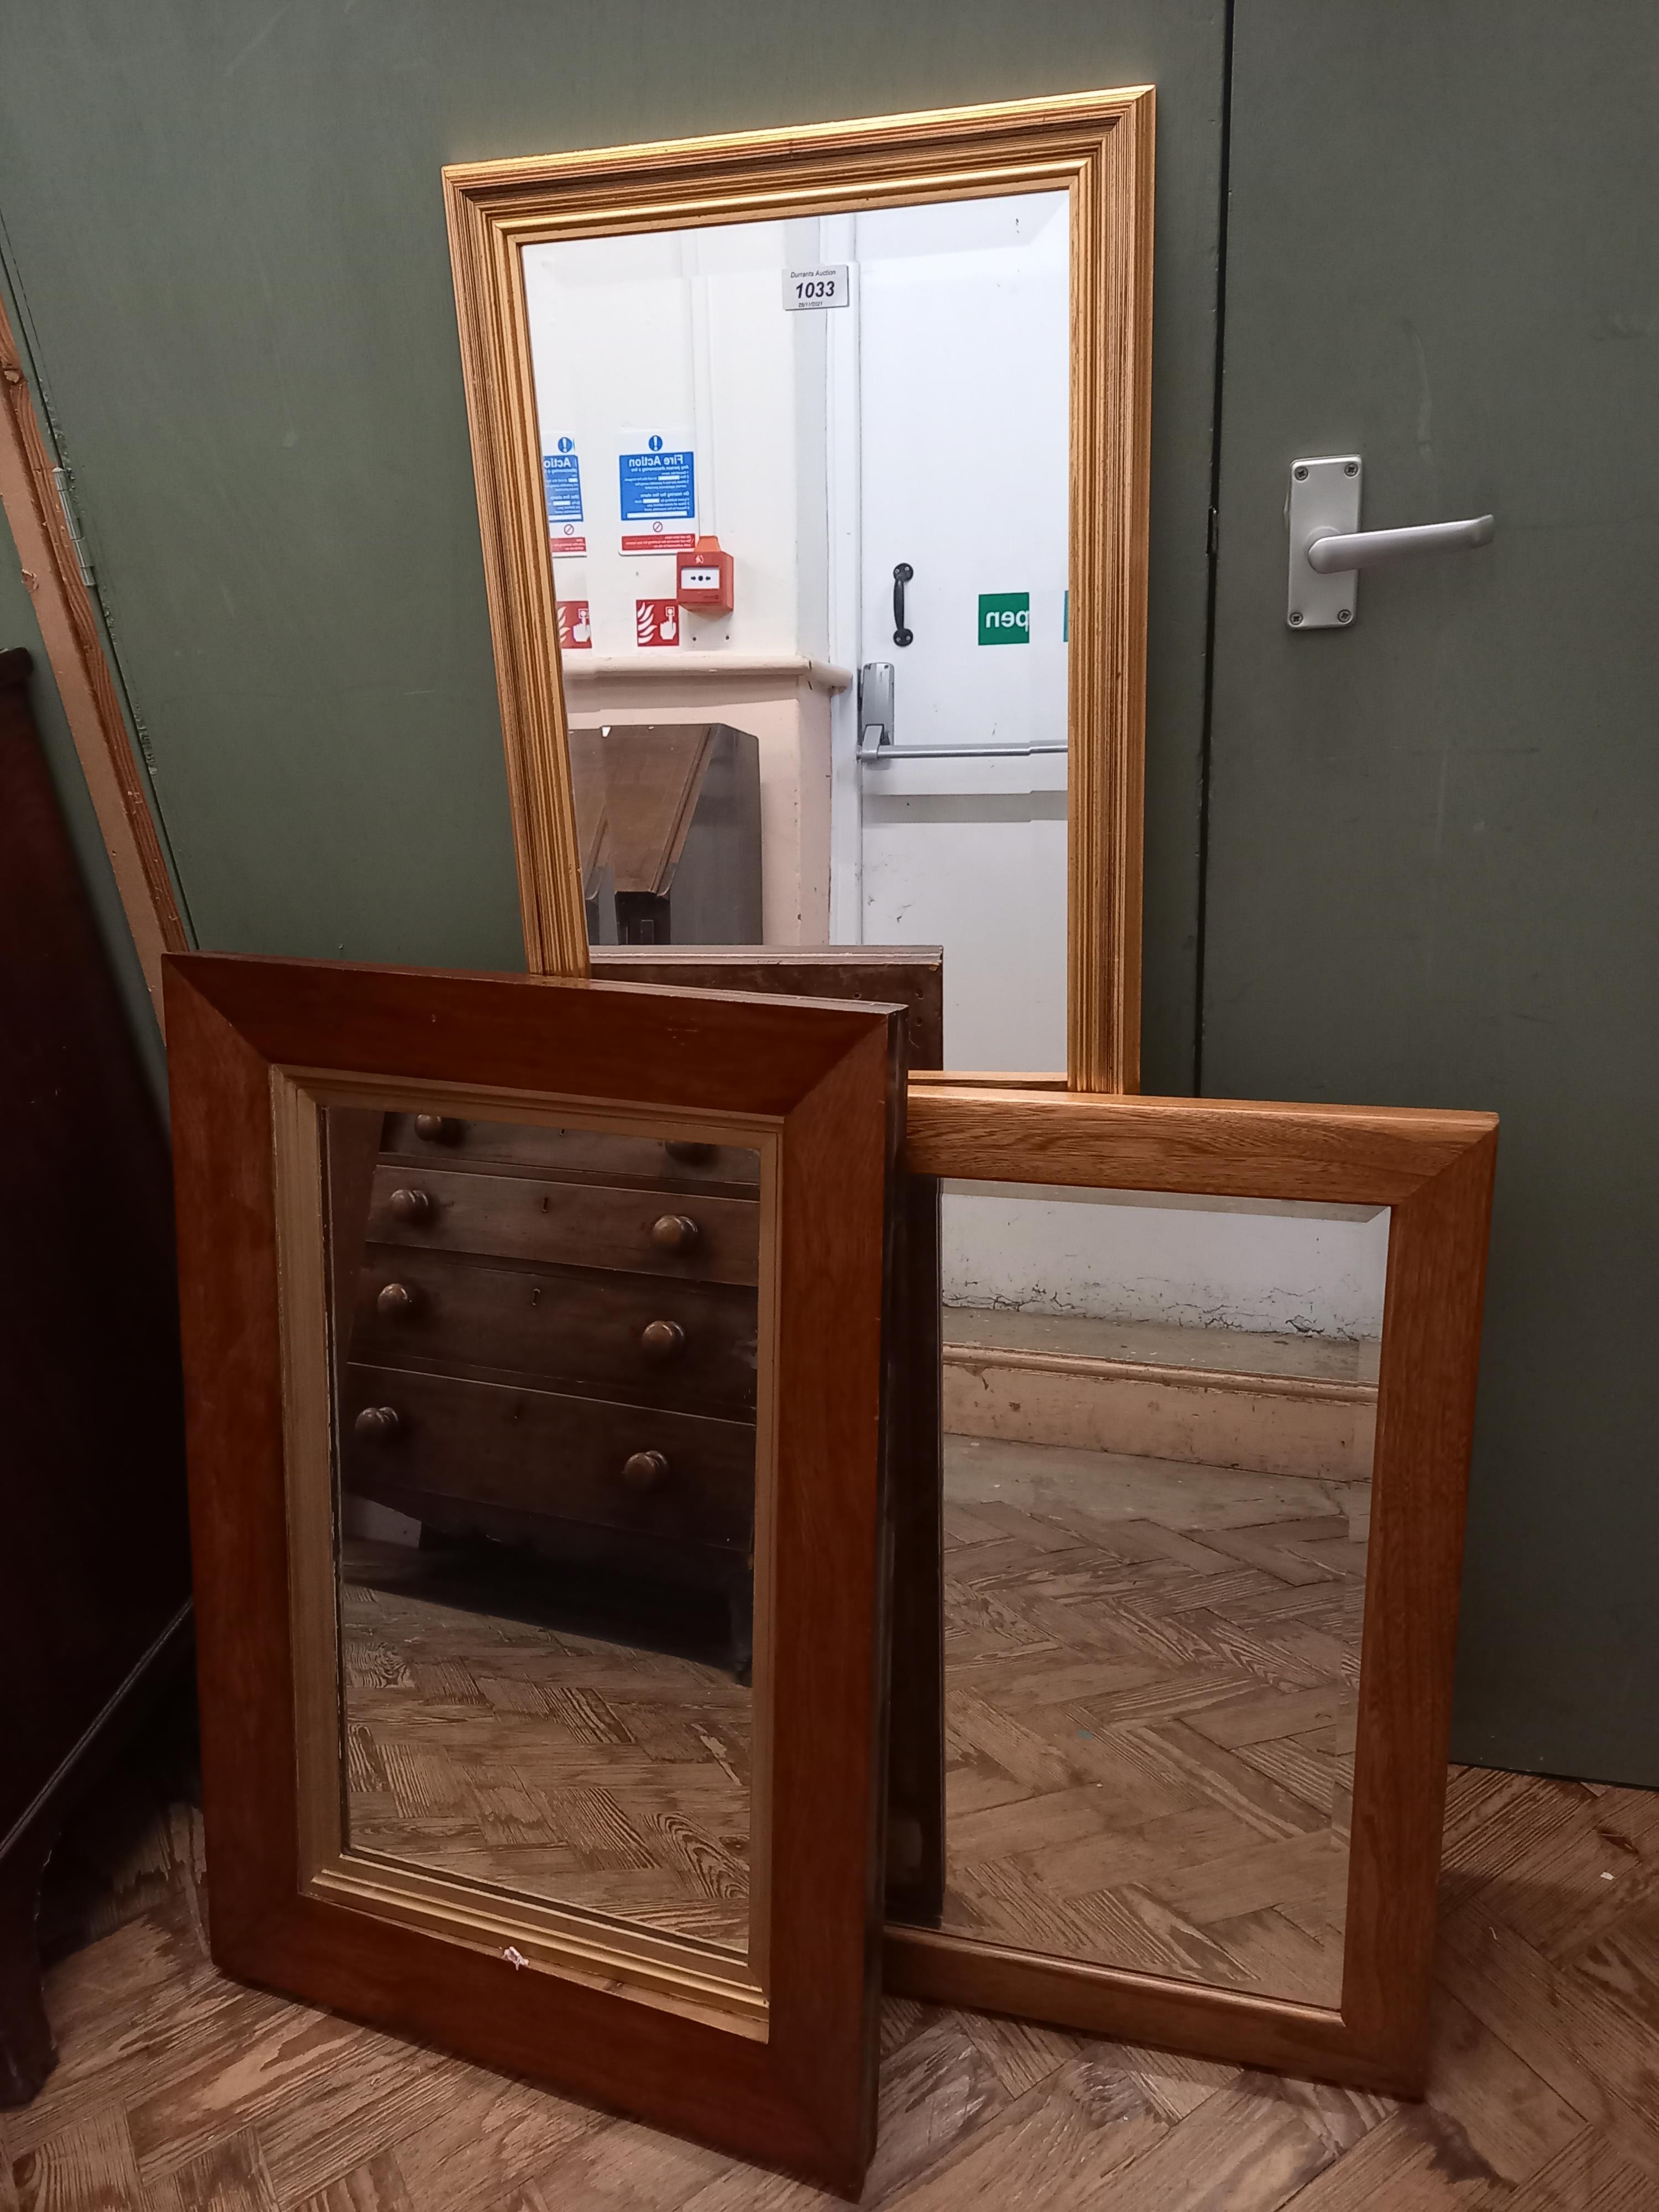 Three rectangular wooden framed mirrors of various sizes